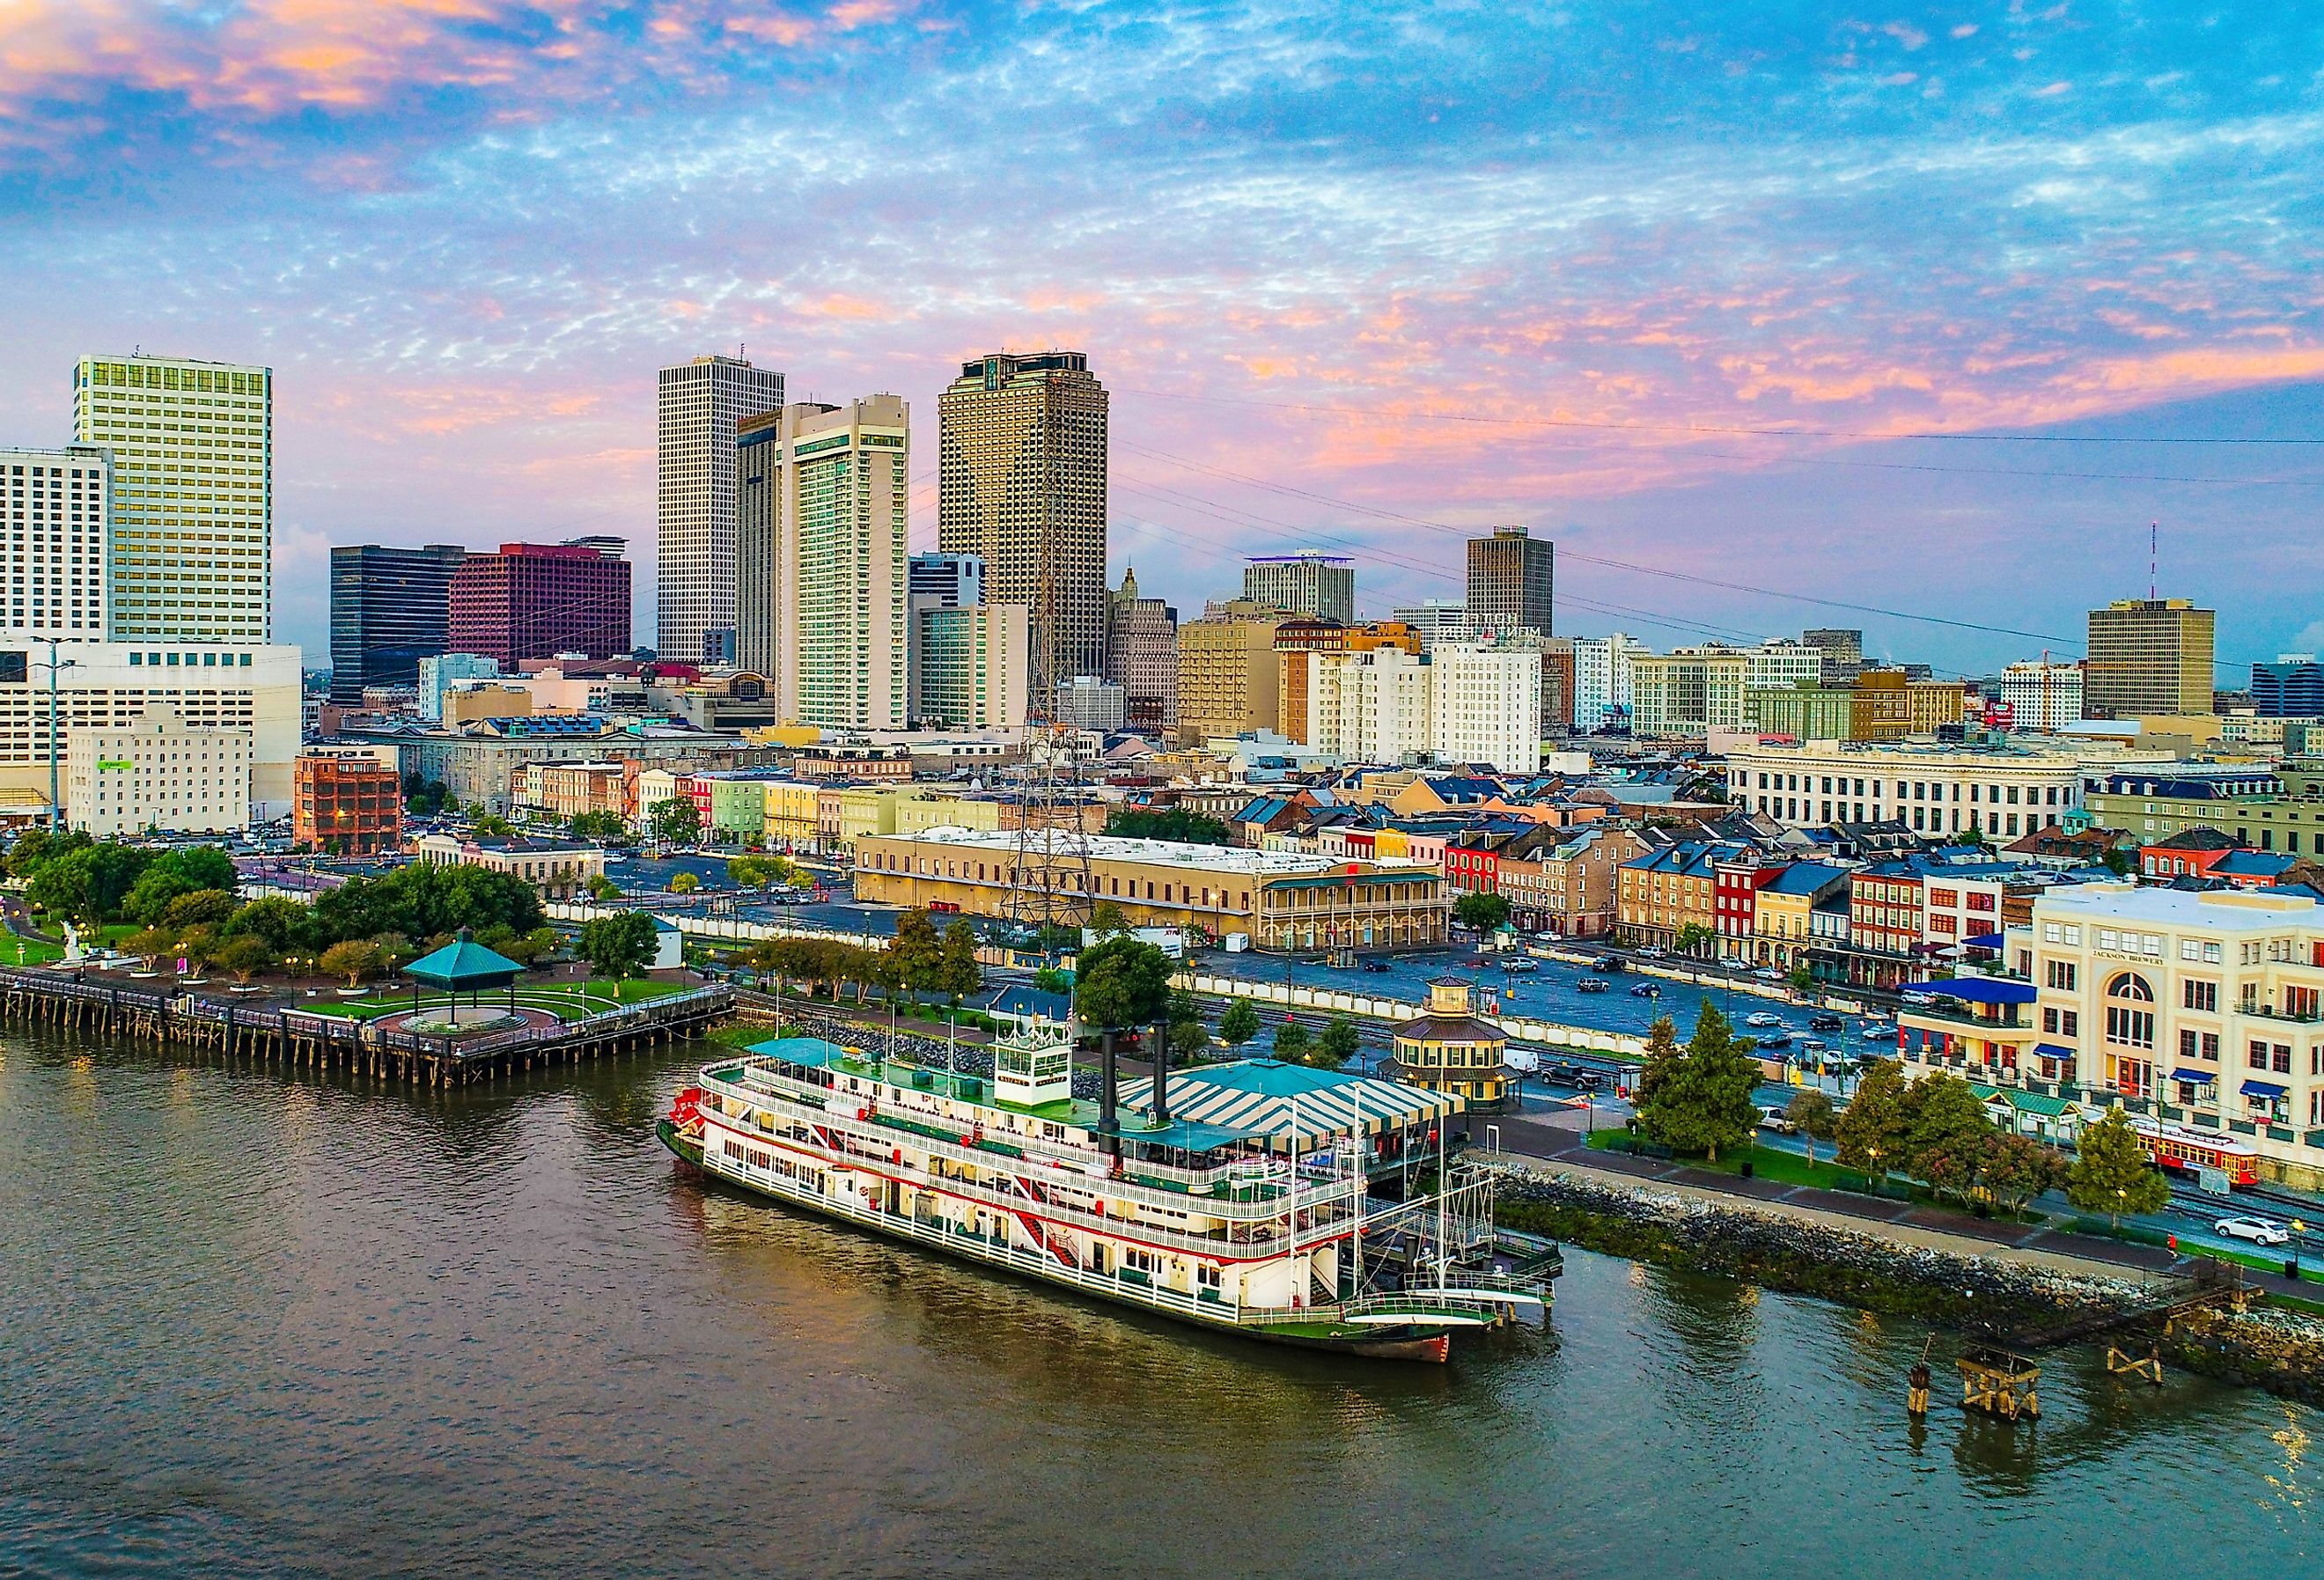 Downtown skyline of New Orleans, Louisiana.